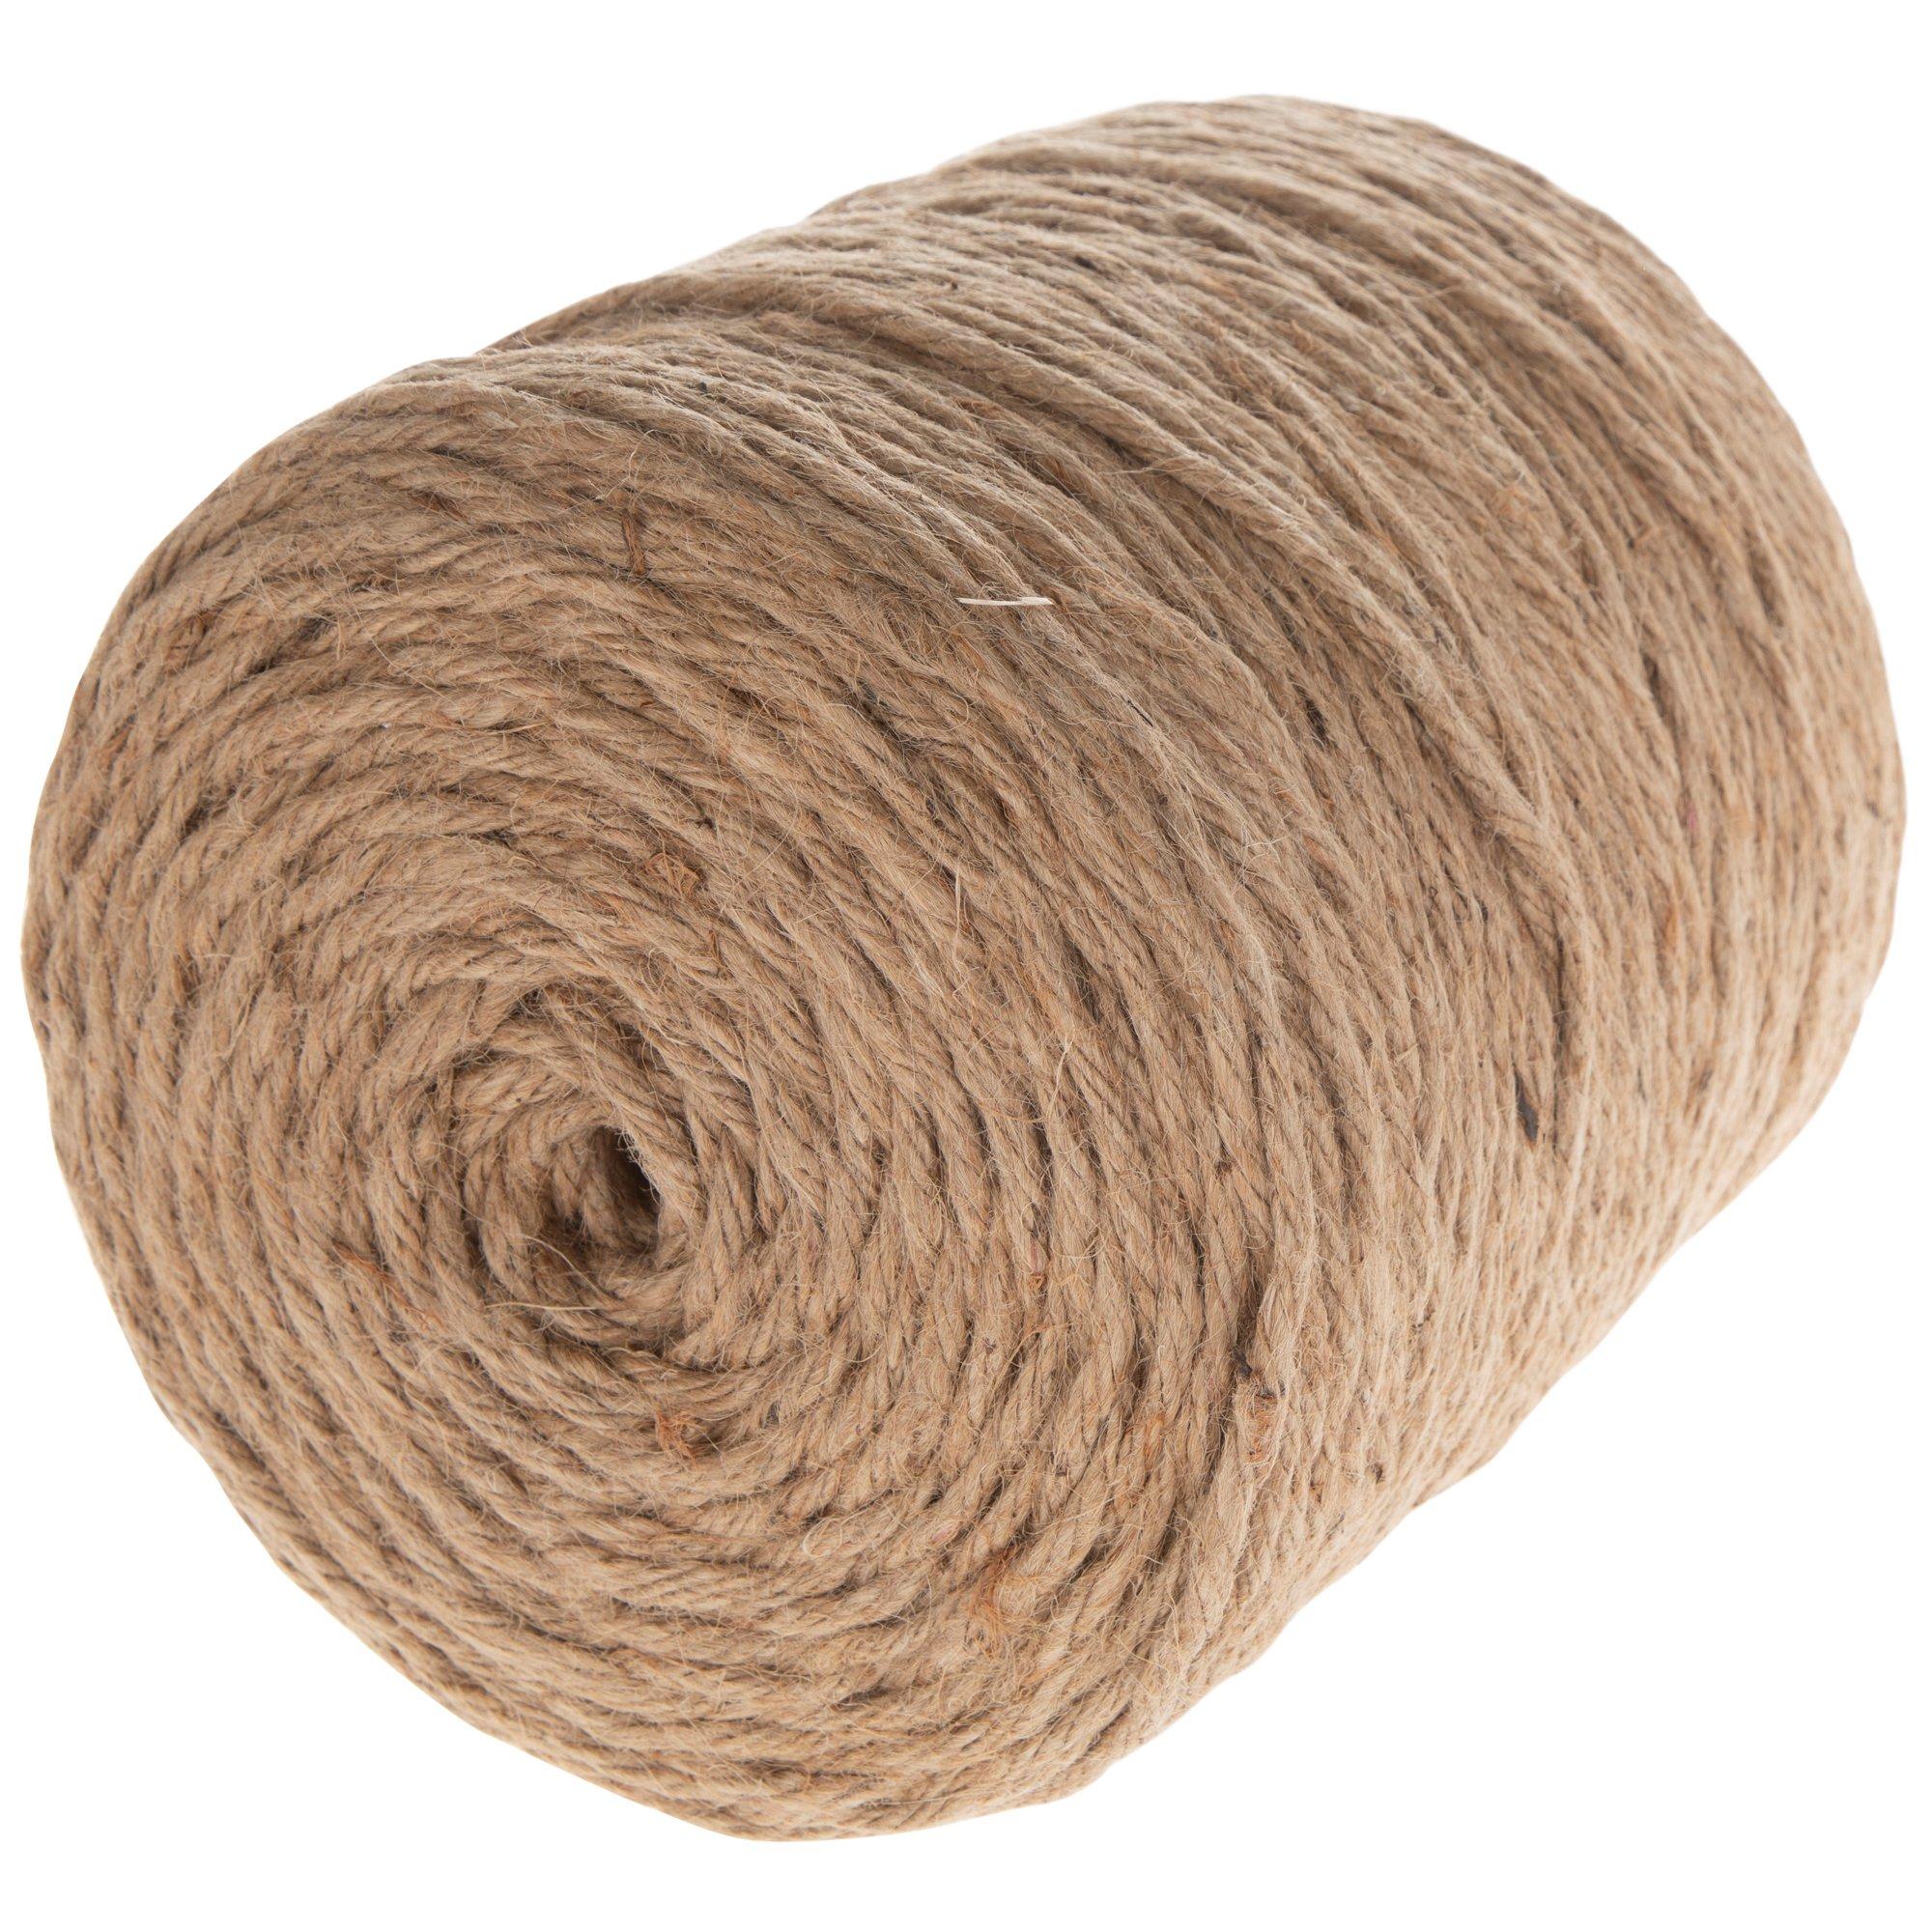 75 Feet 5 Ply 5mm Thick Natural Jute Twine String for Gardens and Crafts 